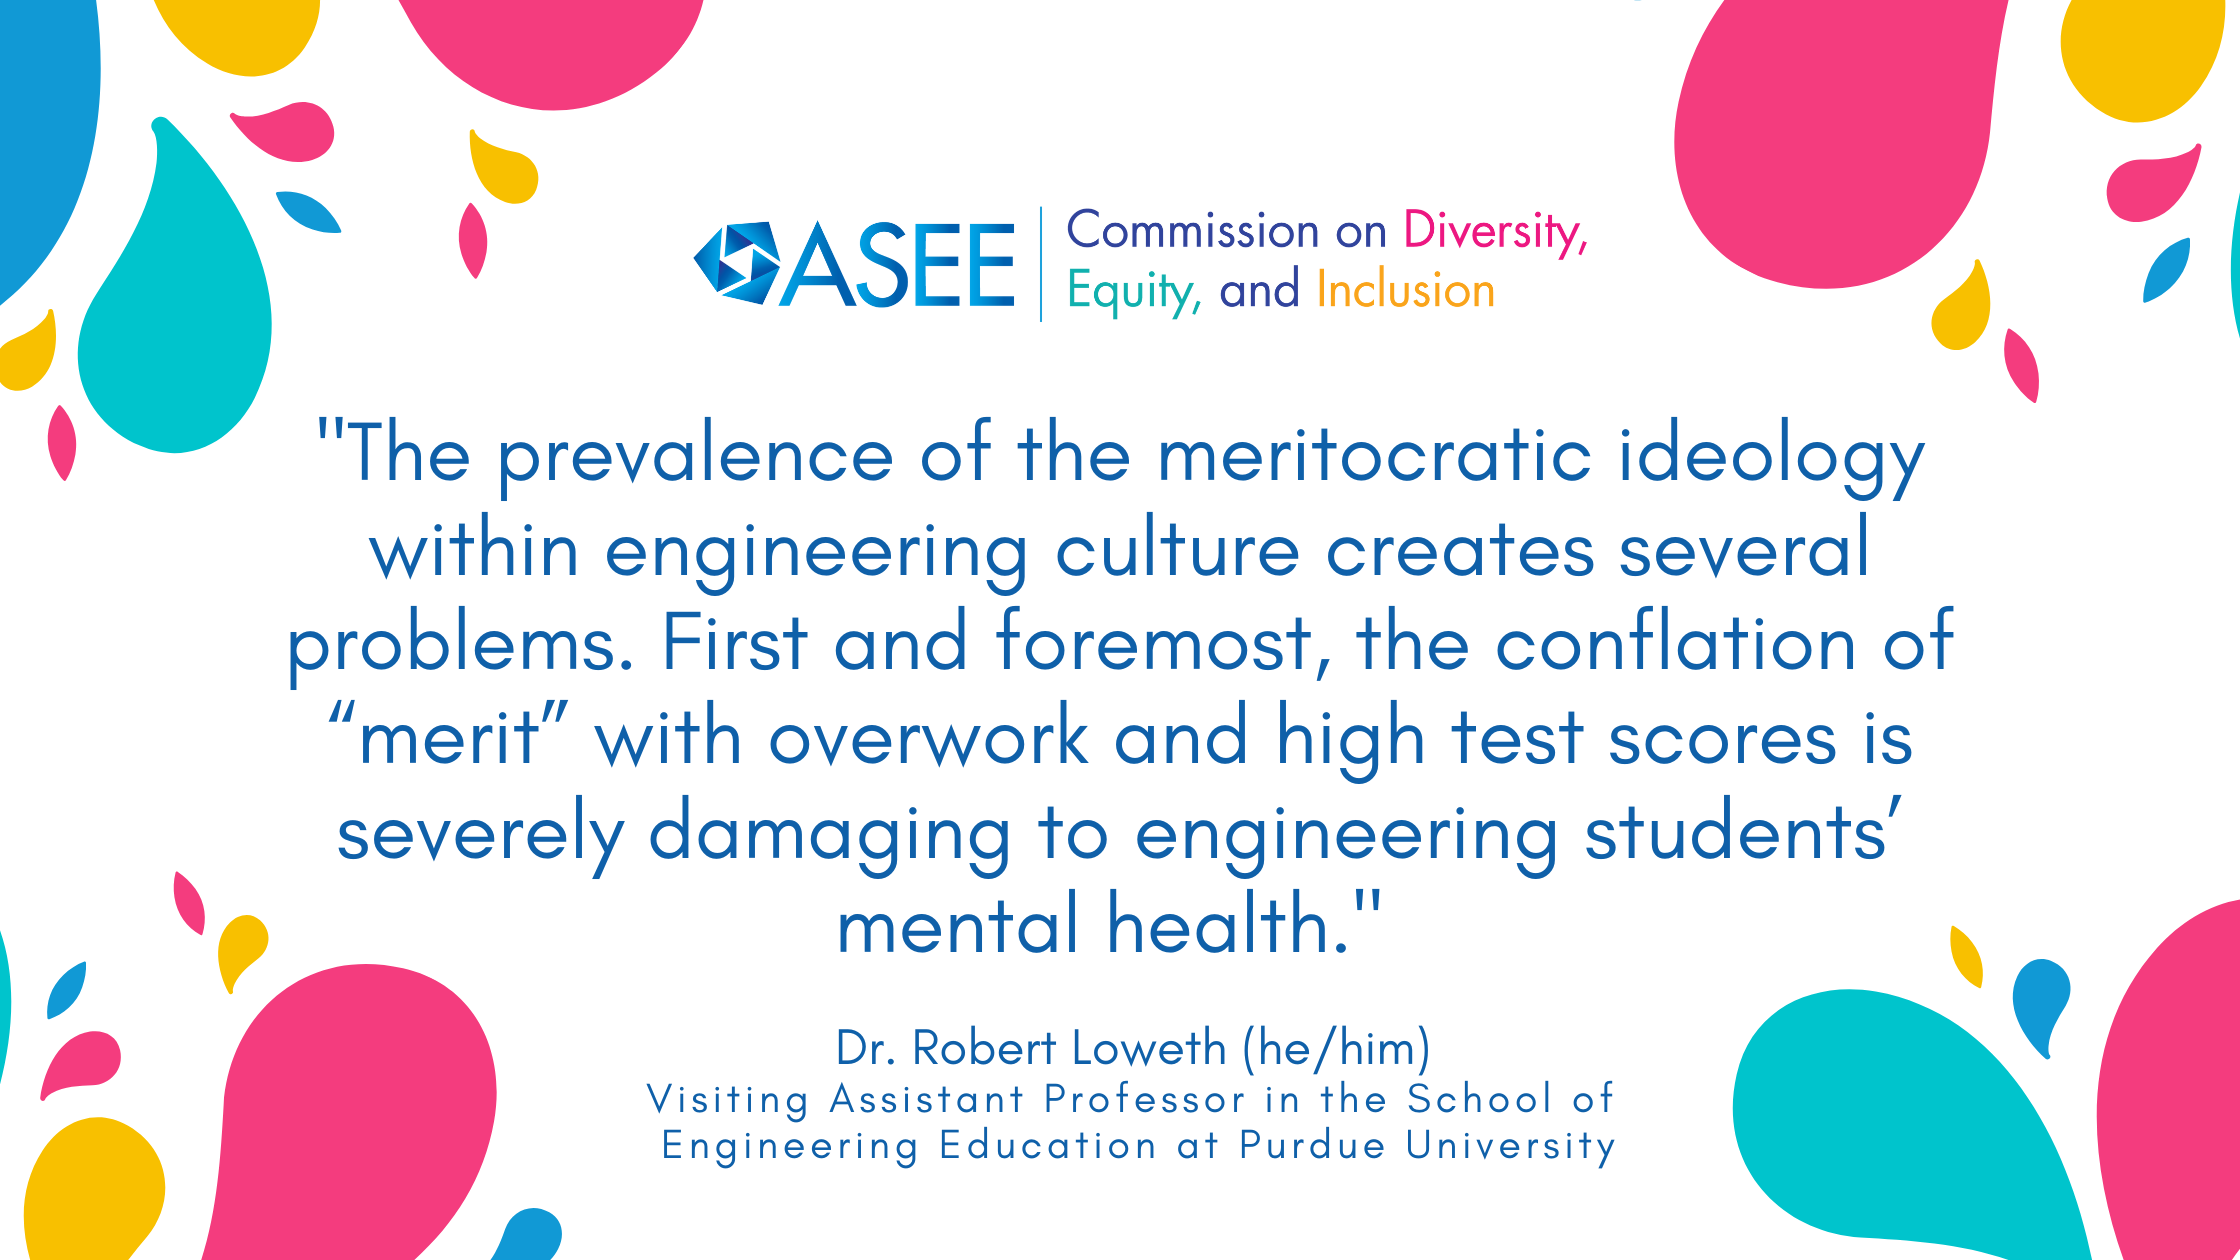 The prevalence of the meritocratic ideology within engineering culture creates several problems. First and foremost, the conflation of “merit” with overwork and high test scores is severely damaging to engineering students’ mental health.